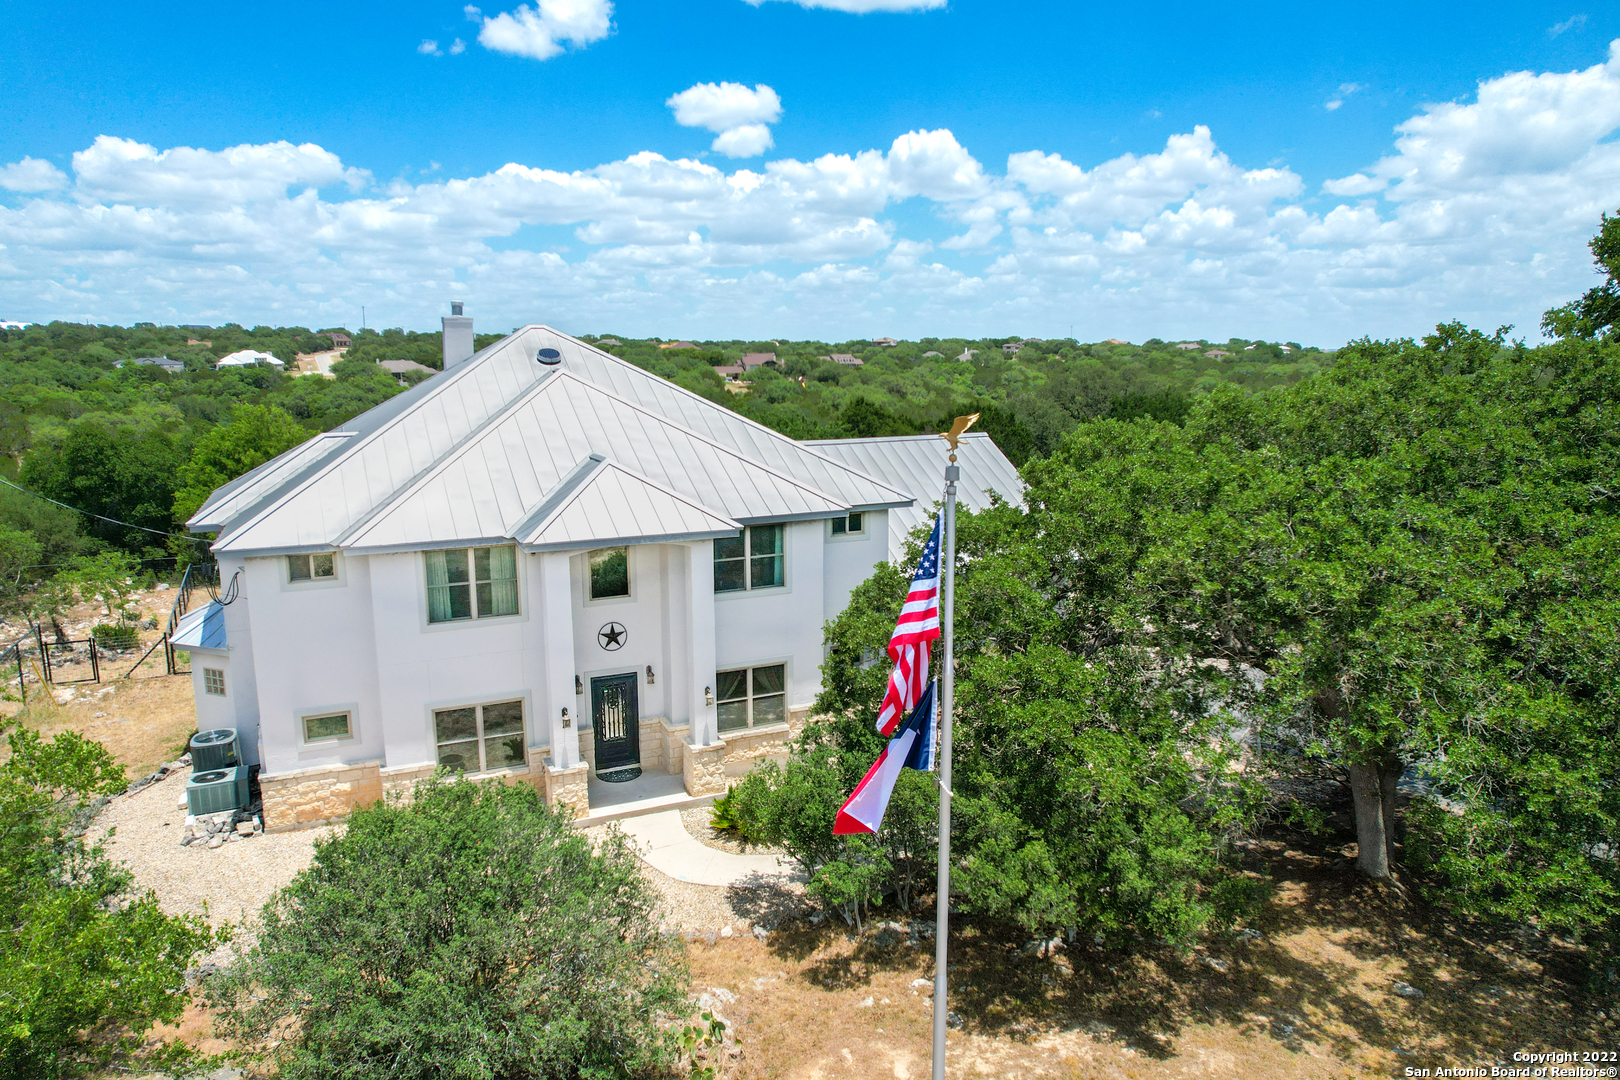 Tucked away on this large 1 acre lot sits this 3877 sqft custom-built, Brad Moore home, that backs up to Devil's Hollow Nature Preserve located in the highly sought out community of Mystic Shores in the TX Hill Country. Open floor plan, soaring high ceilings where the entryway gives way to the formal dining on the right and the study on the left--both rooms with elegant trey ceilings.  Enter into the large living area with a cozy wood burning, floor to ceiling fireplace, and large windows provide lots of natural light. New metal roof, all windows replaced in 2017 and new upgraded custom steel doors with Texas star accent in the front and back. Kitchen has built-in oven & 2 microwaves, smooth-top cooktop, granite counters, under mount sink, glass-front cabinetry, and center island for additional workspace. Master bedroom has extra insulation on the shared wall with the living room. Light pours through the master bath with numerous windows, walk-through shower, and a large garden soaking tub. Family room/loft upstairs with wet bar & mini fridge, 4 secondary bedrooms and 2 bathrooms. Covered balcony with breath-taking hill country views accessed from a bedroom upstairs. Expansive game room with screen & projector. Enjoy the serene Texas hill country landscape on the outdoor patio. Small shed for additional storage. The home is also plumbed for propane, but no tank. With access to Mystic Shores amenities, such as lake access, boat ramp & dock, RV storage, tennis courts, basketball courts, volleyball court, swimming pool, pavilions, 233 High Point's value extends beyond the private 1 acre lot. Come make Mystic Shores home! (For a Matterport 3-D tour contact the listing agent!)